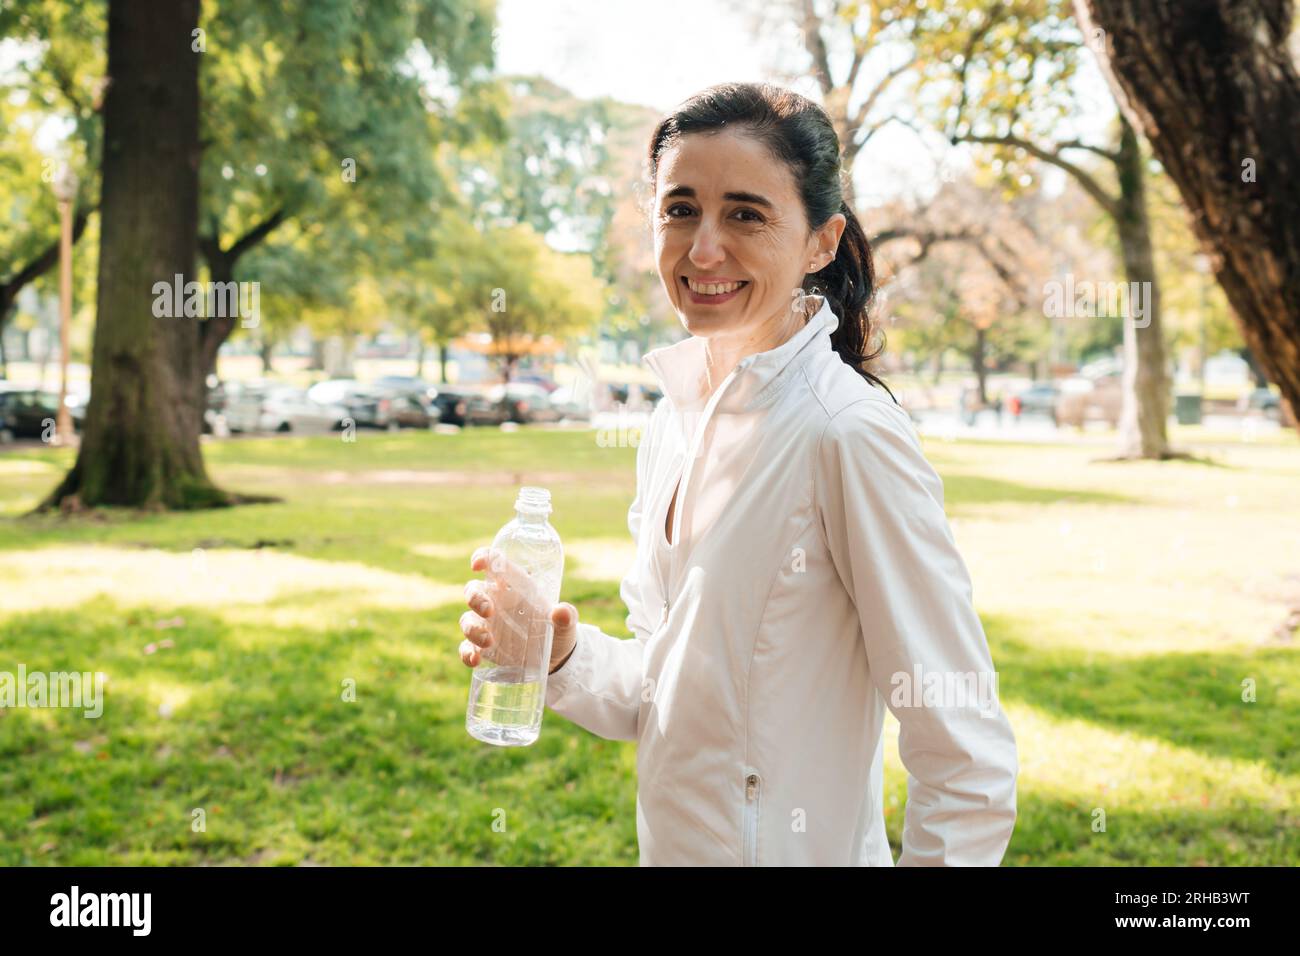 Middle aged woman smiles and looks at camera with water bottle in hand, after workout in park. Stock Photo